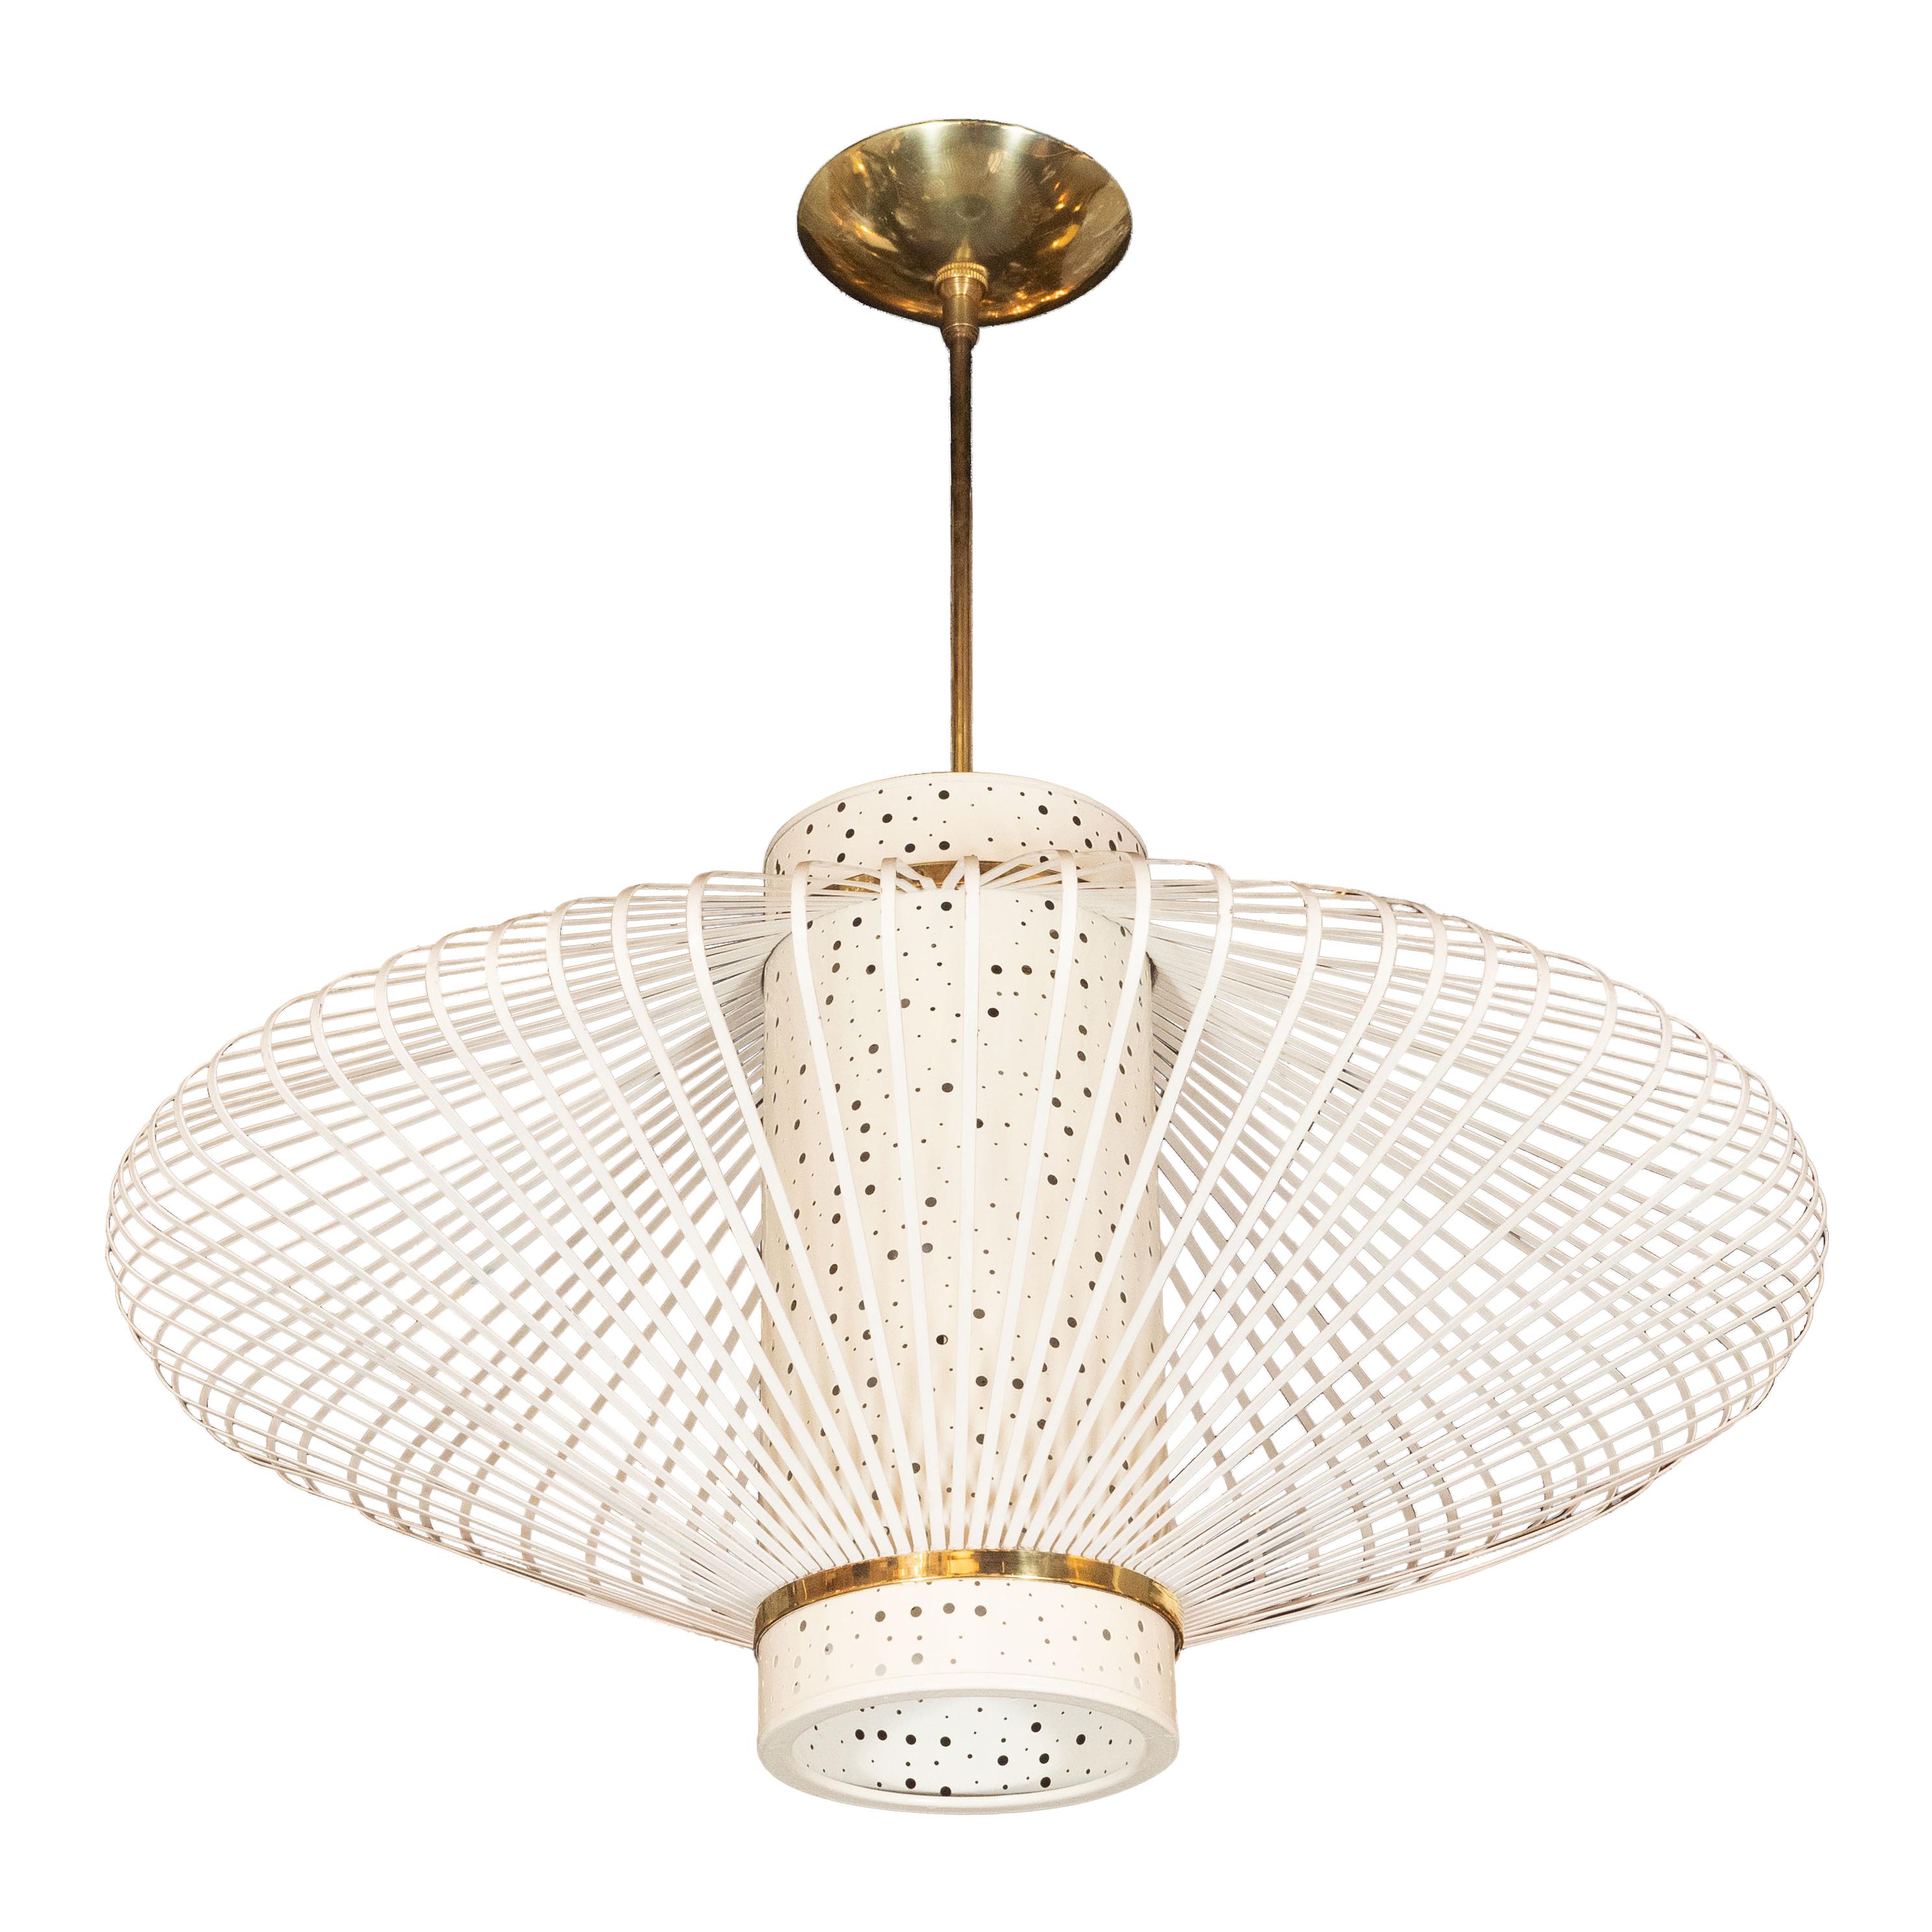 French Mid-Century Modern Sculptural Perforated Enamel and Brass Chandelier